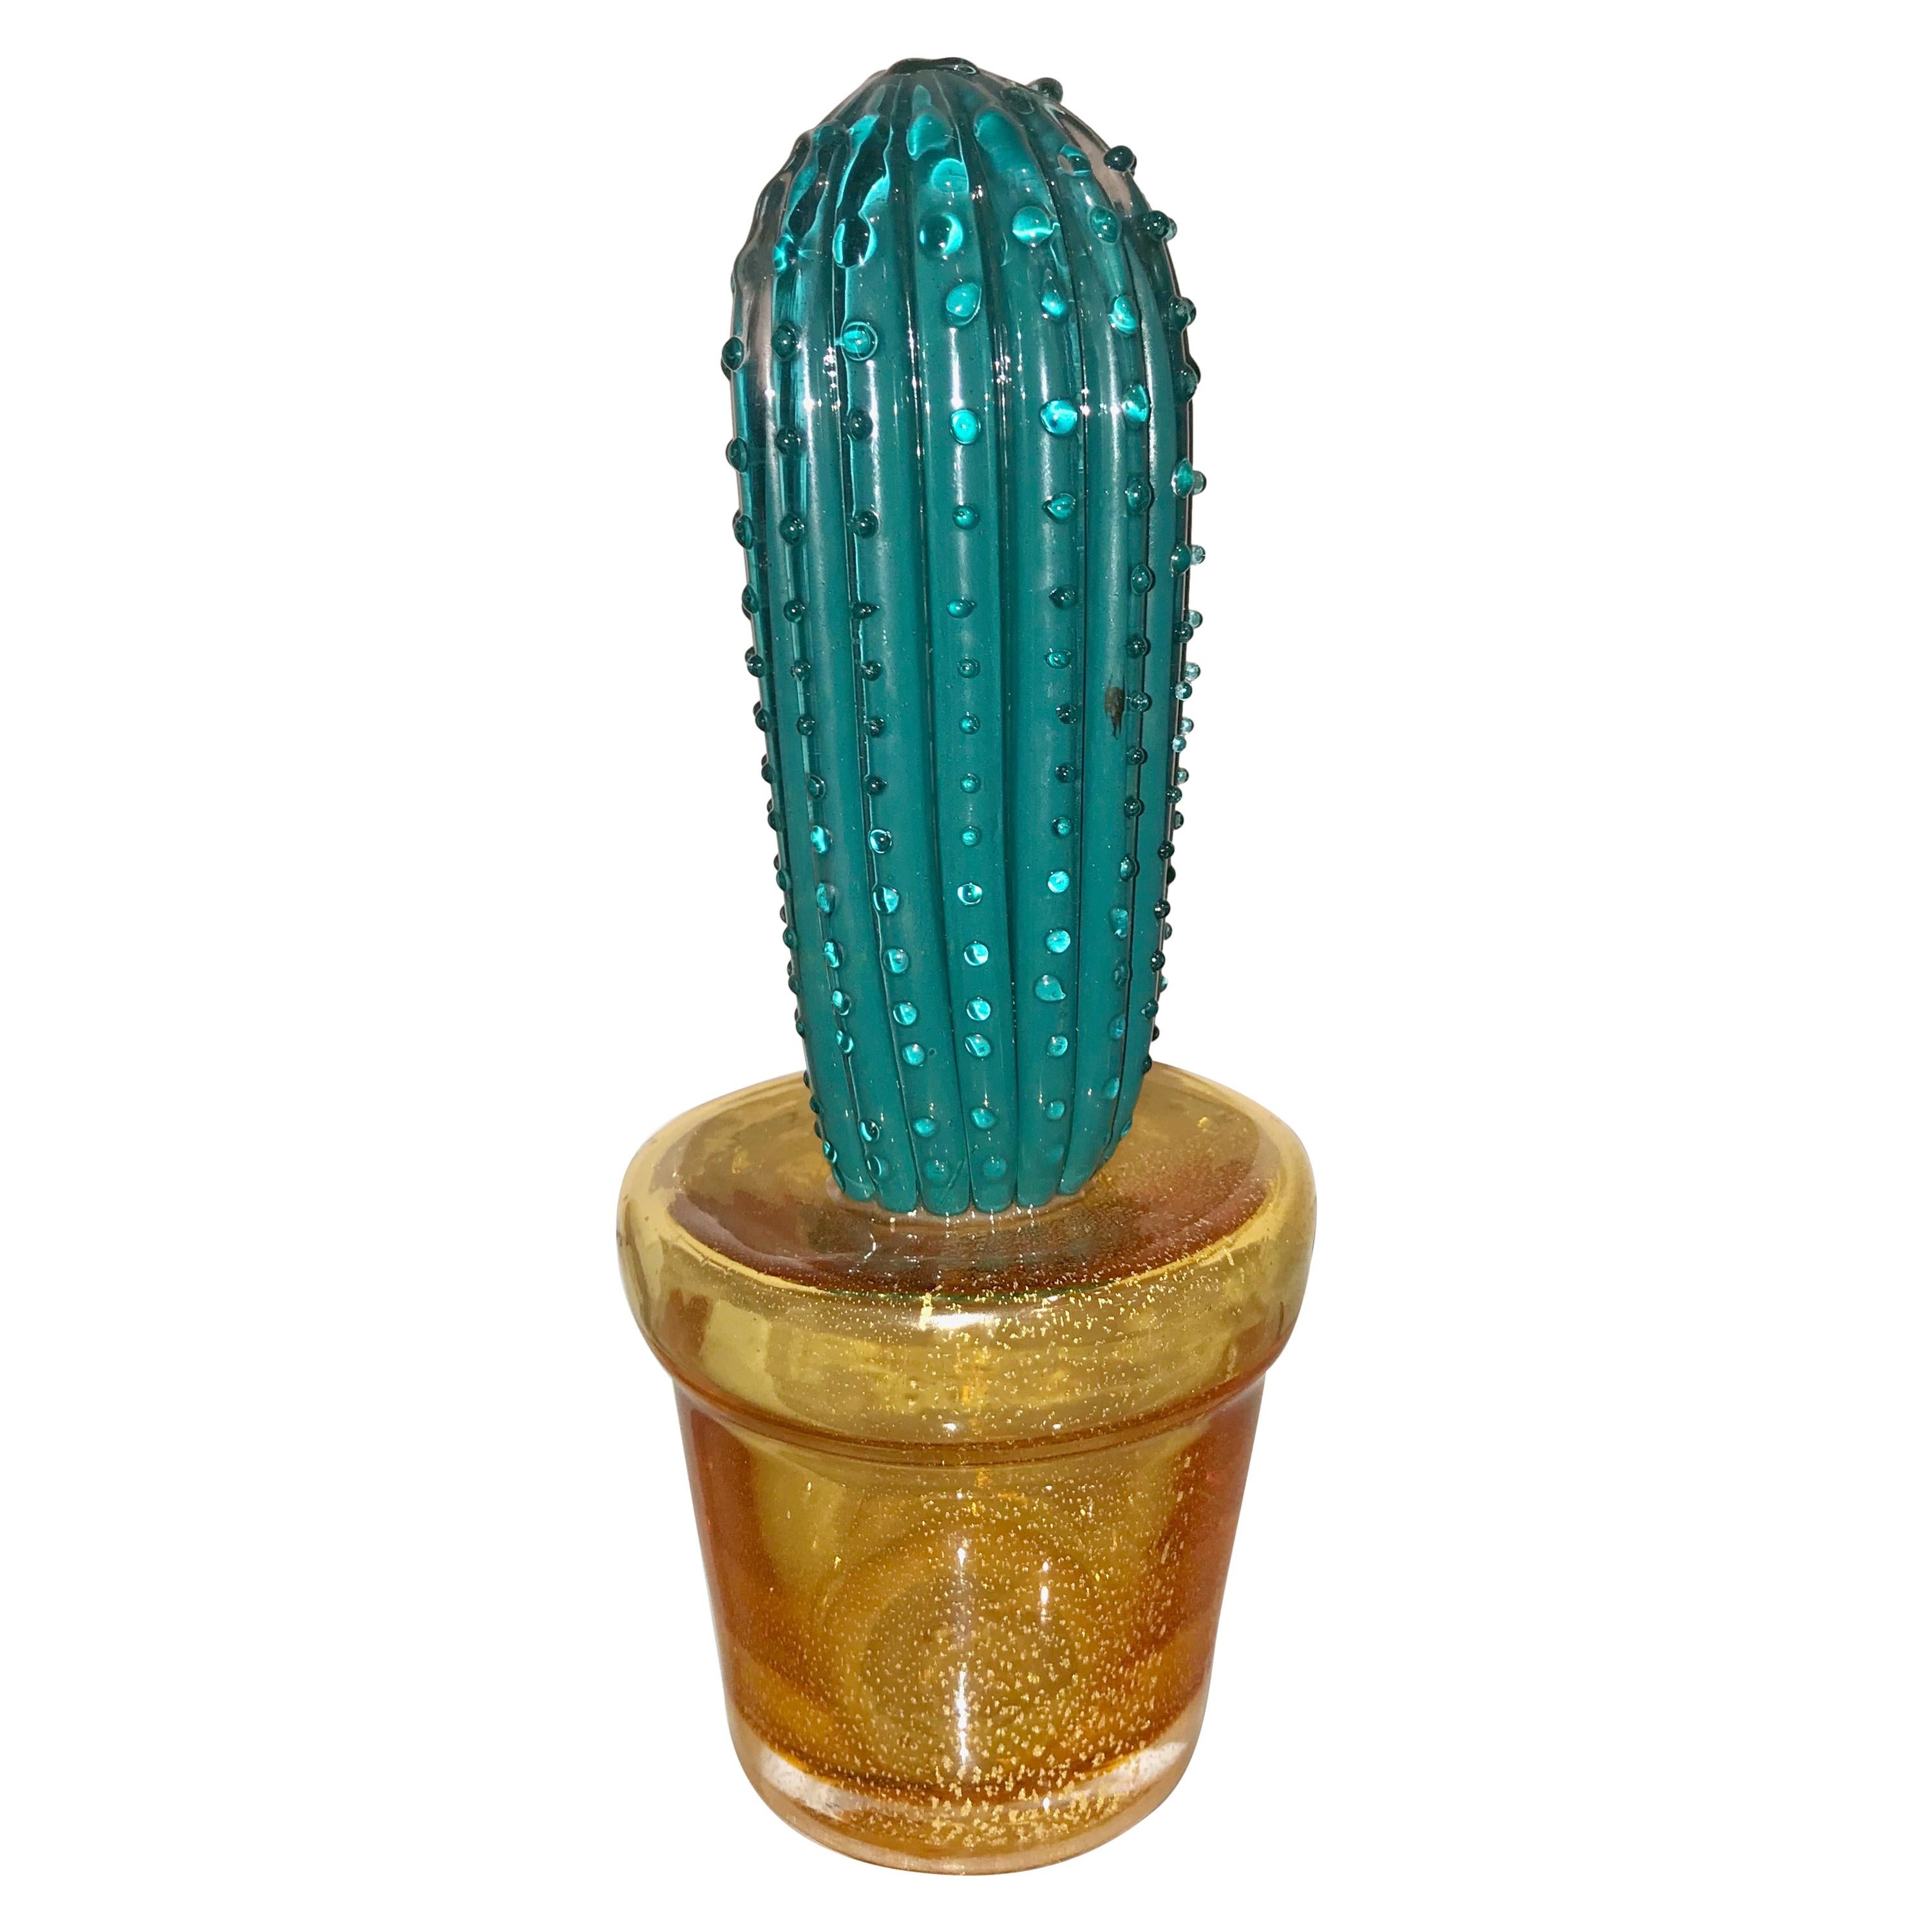 1990s Vintage Italian Teal Green Murano Glass Tall Cactus Plant with Gold Pot